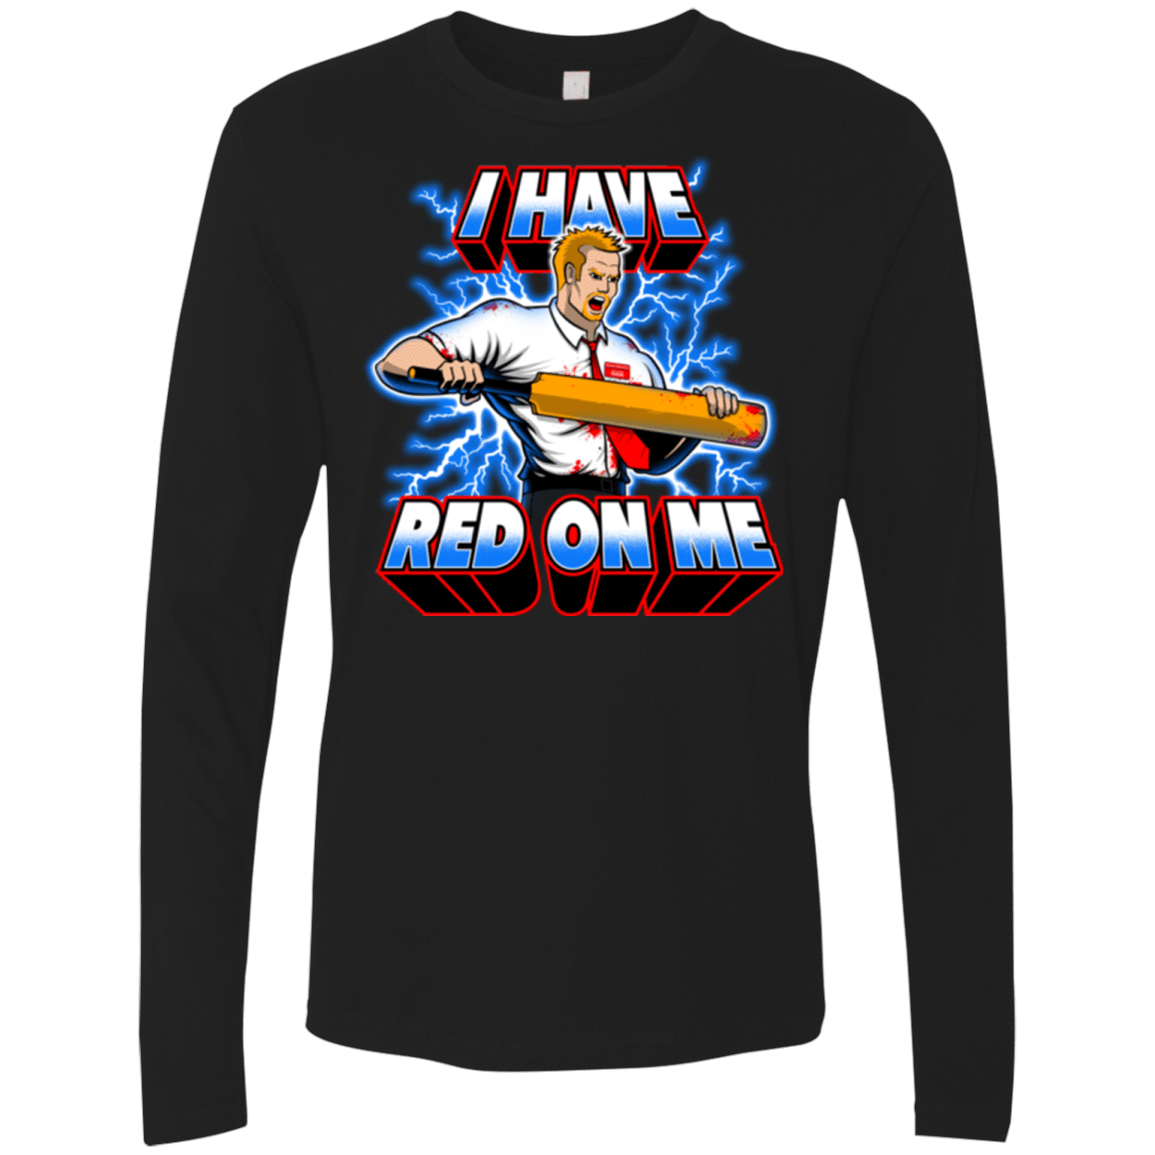 T-Shirts Black / Small I have red on me Men's Premium Long Sleeve